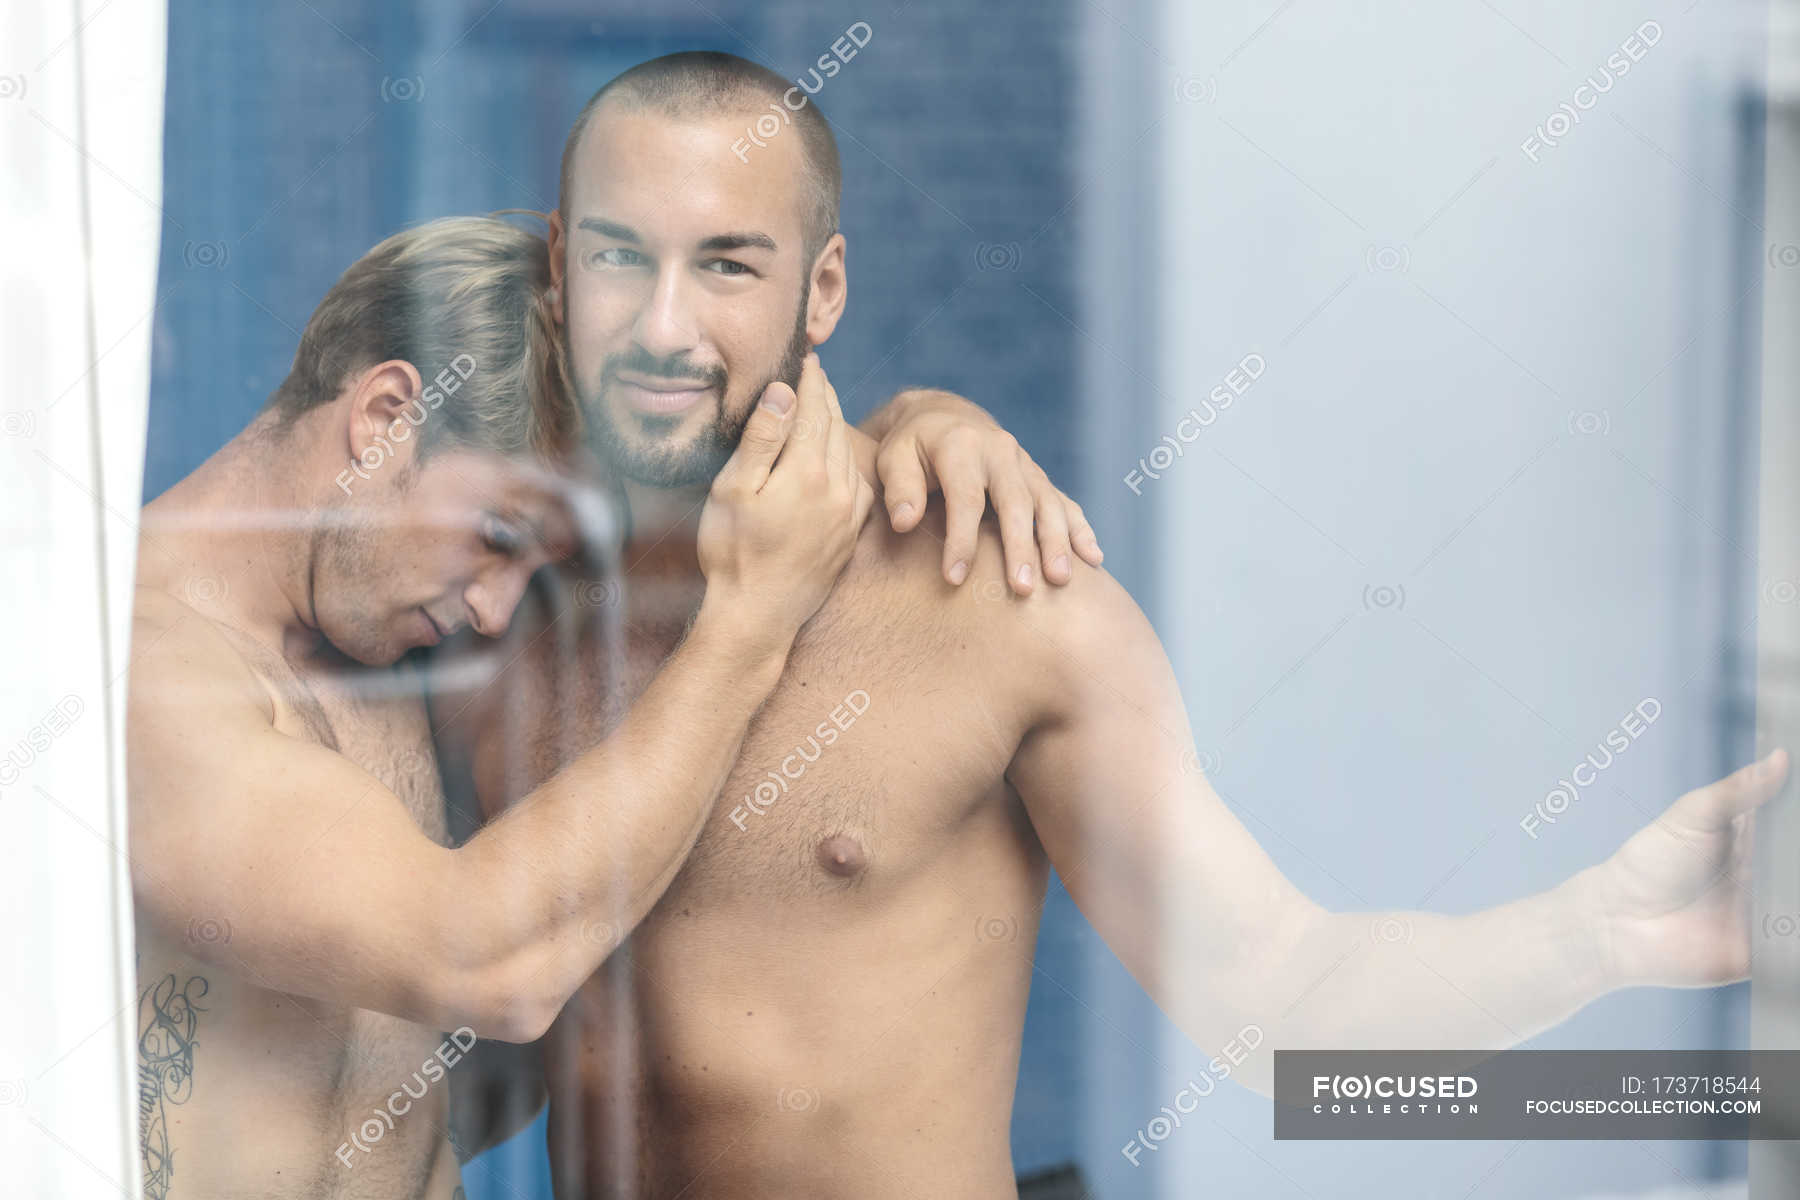 pictures of gay men couple in the shower